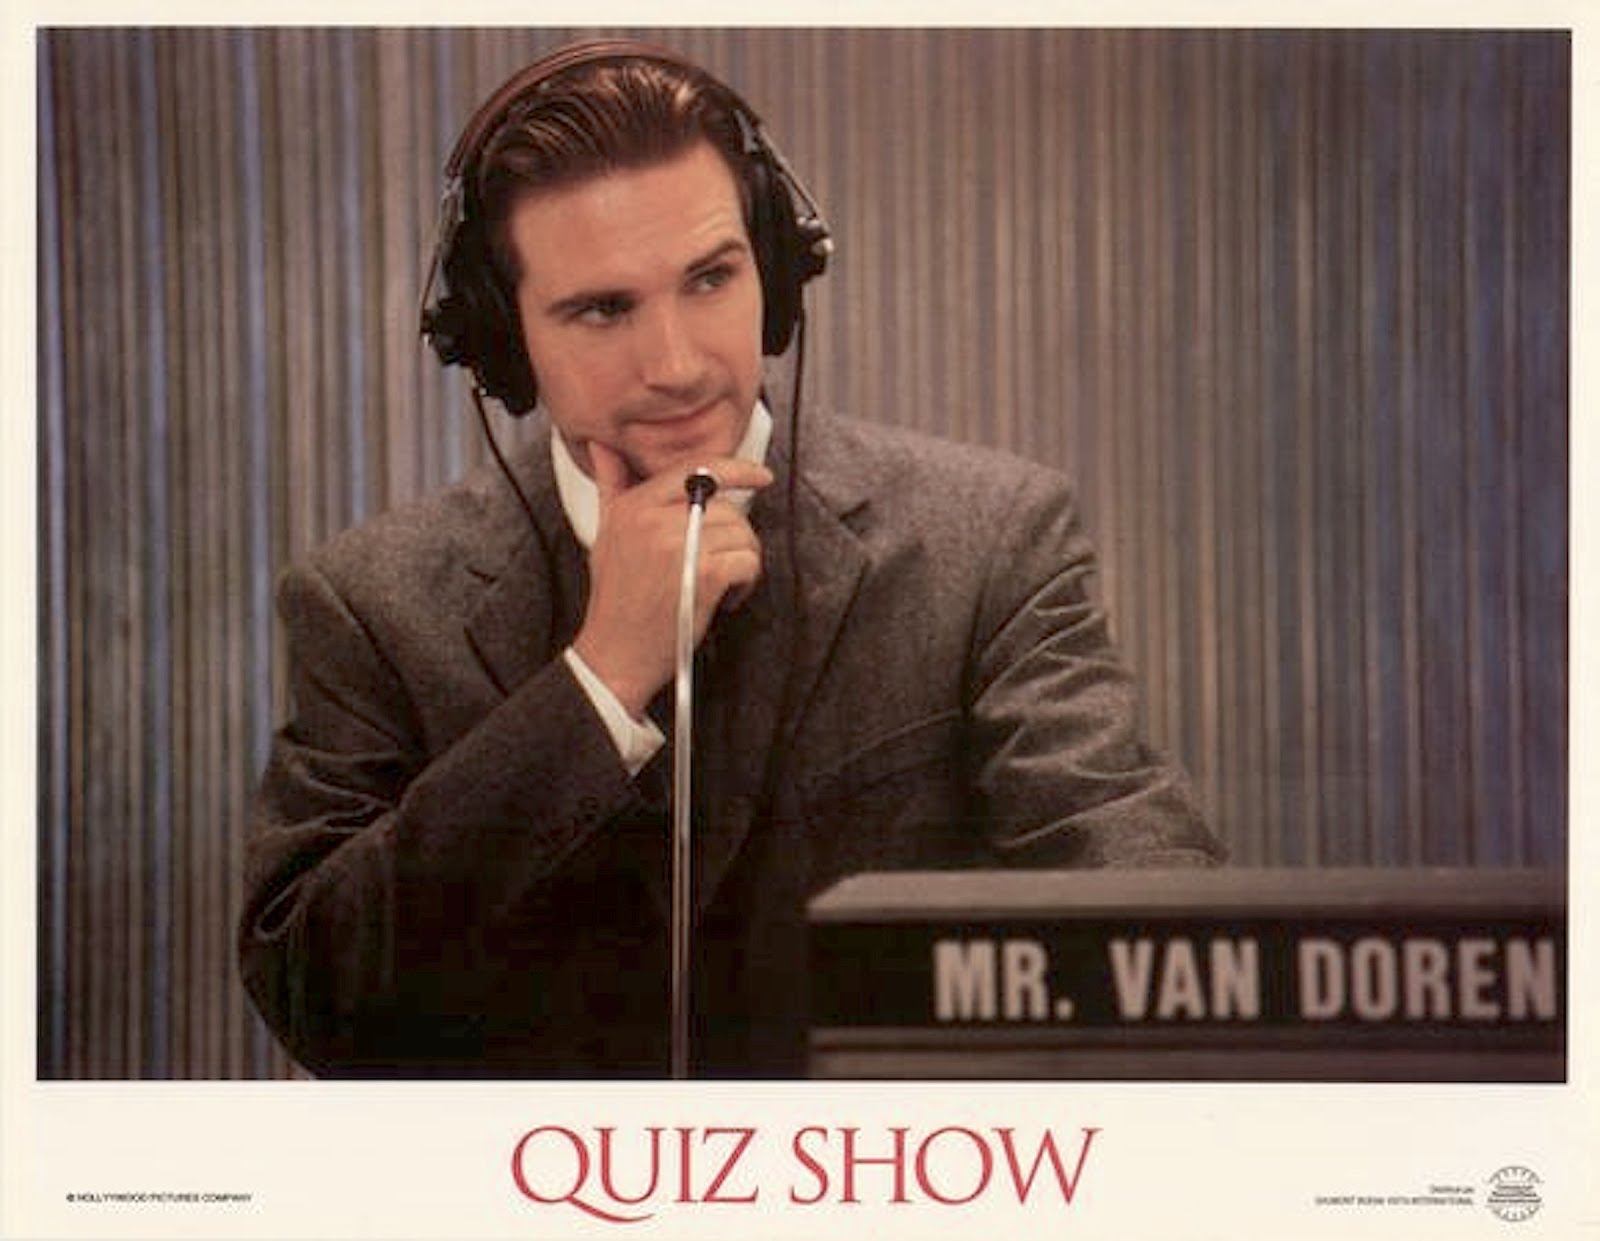 REDFORD'S QUIZ SHOW at 20